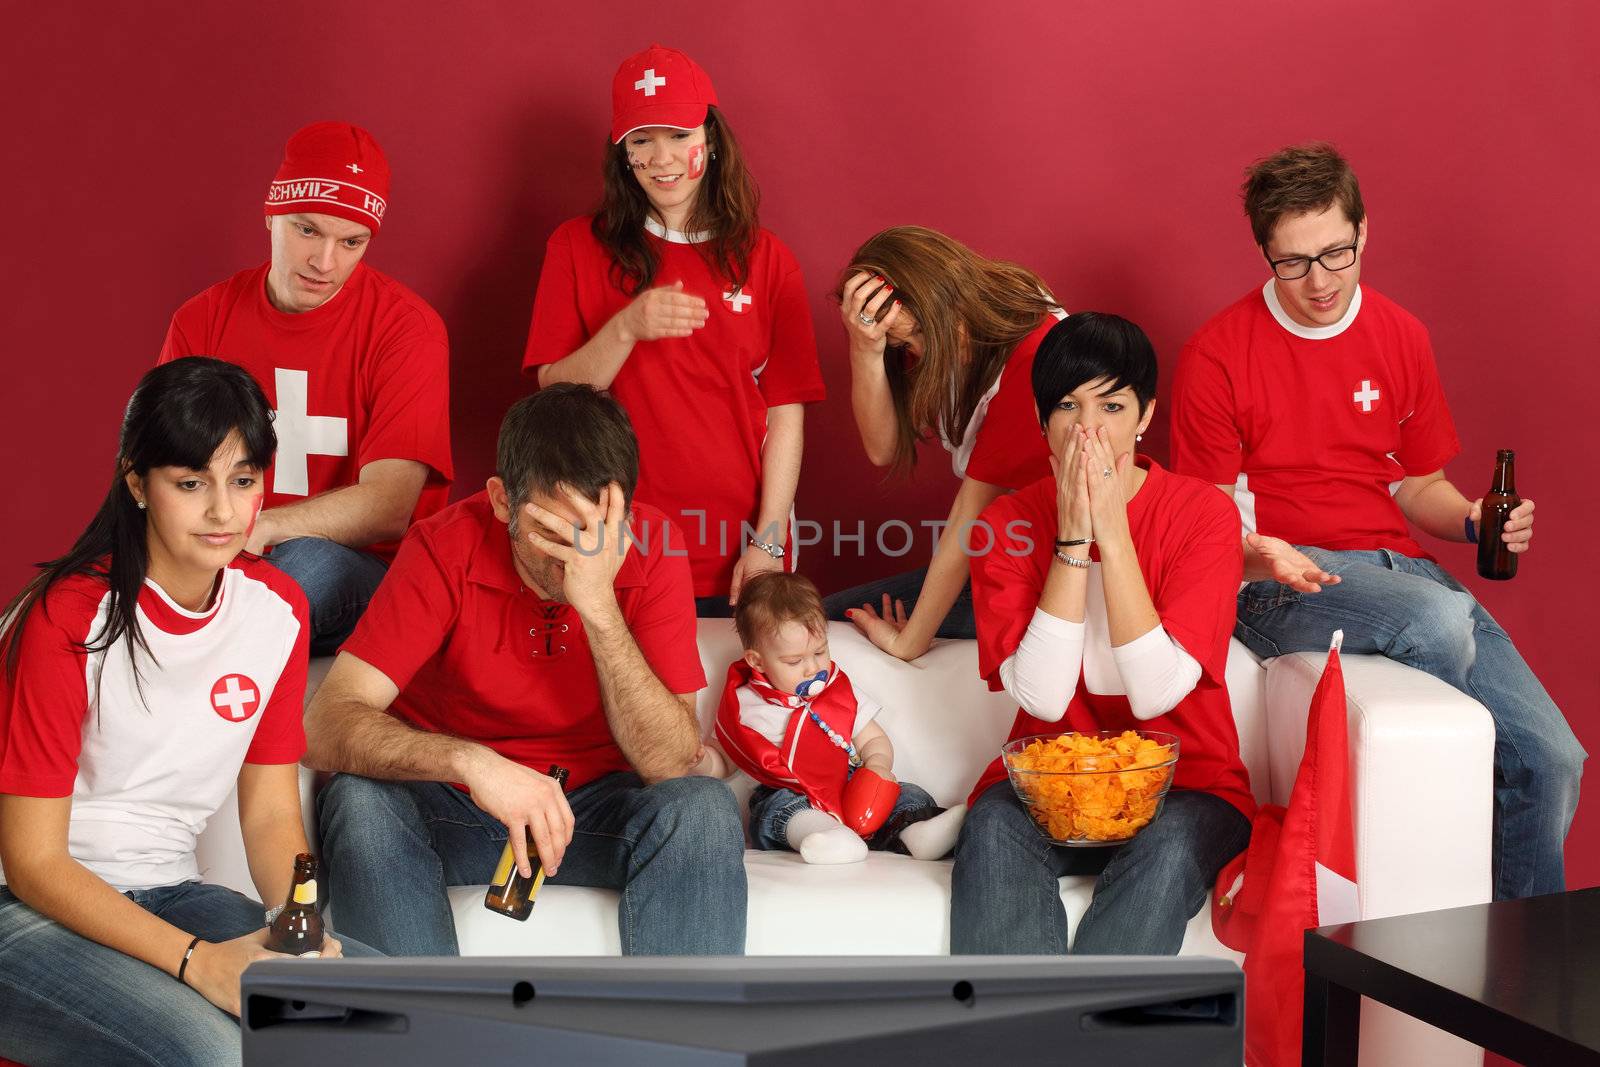 Disappointed Swiss sports fans by sumners